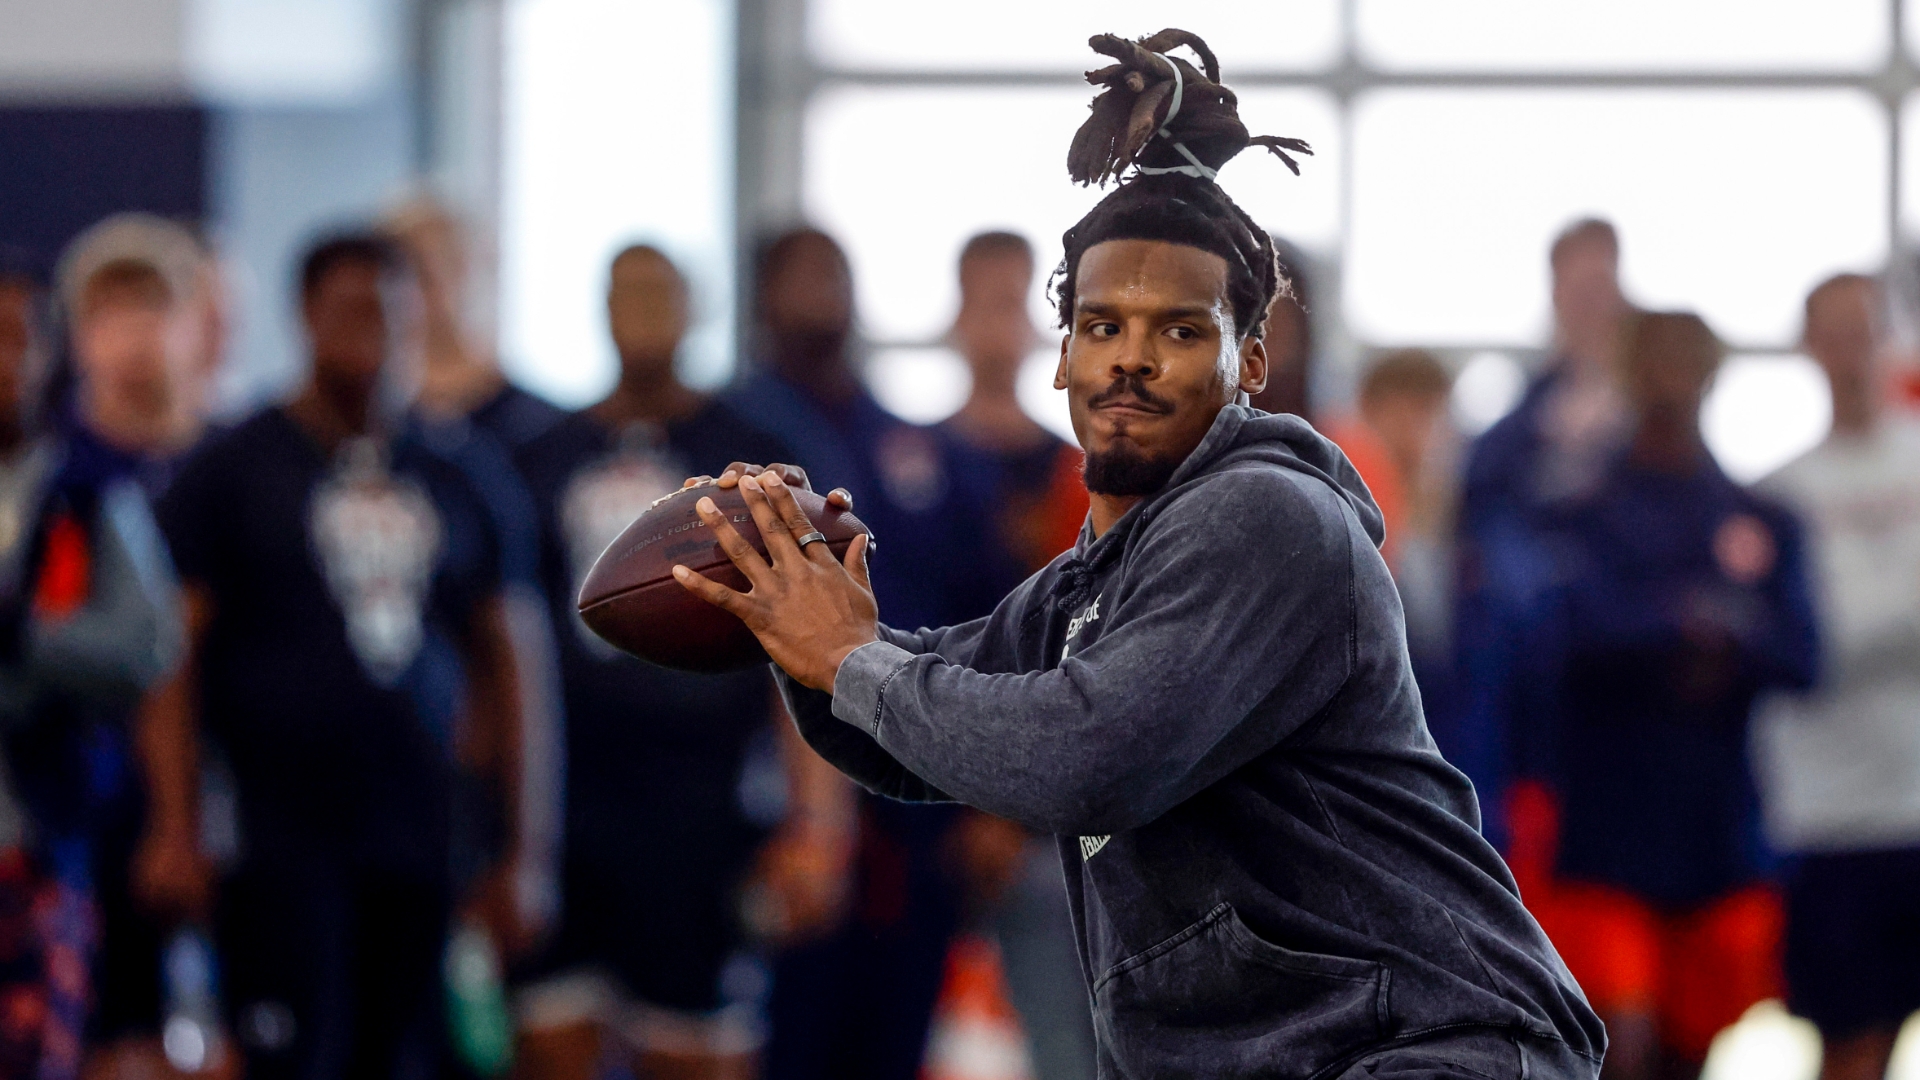 Cam Newton shows off his skills at Auburn's pro day Stream the Video